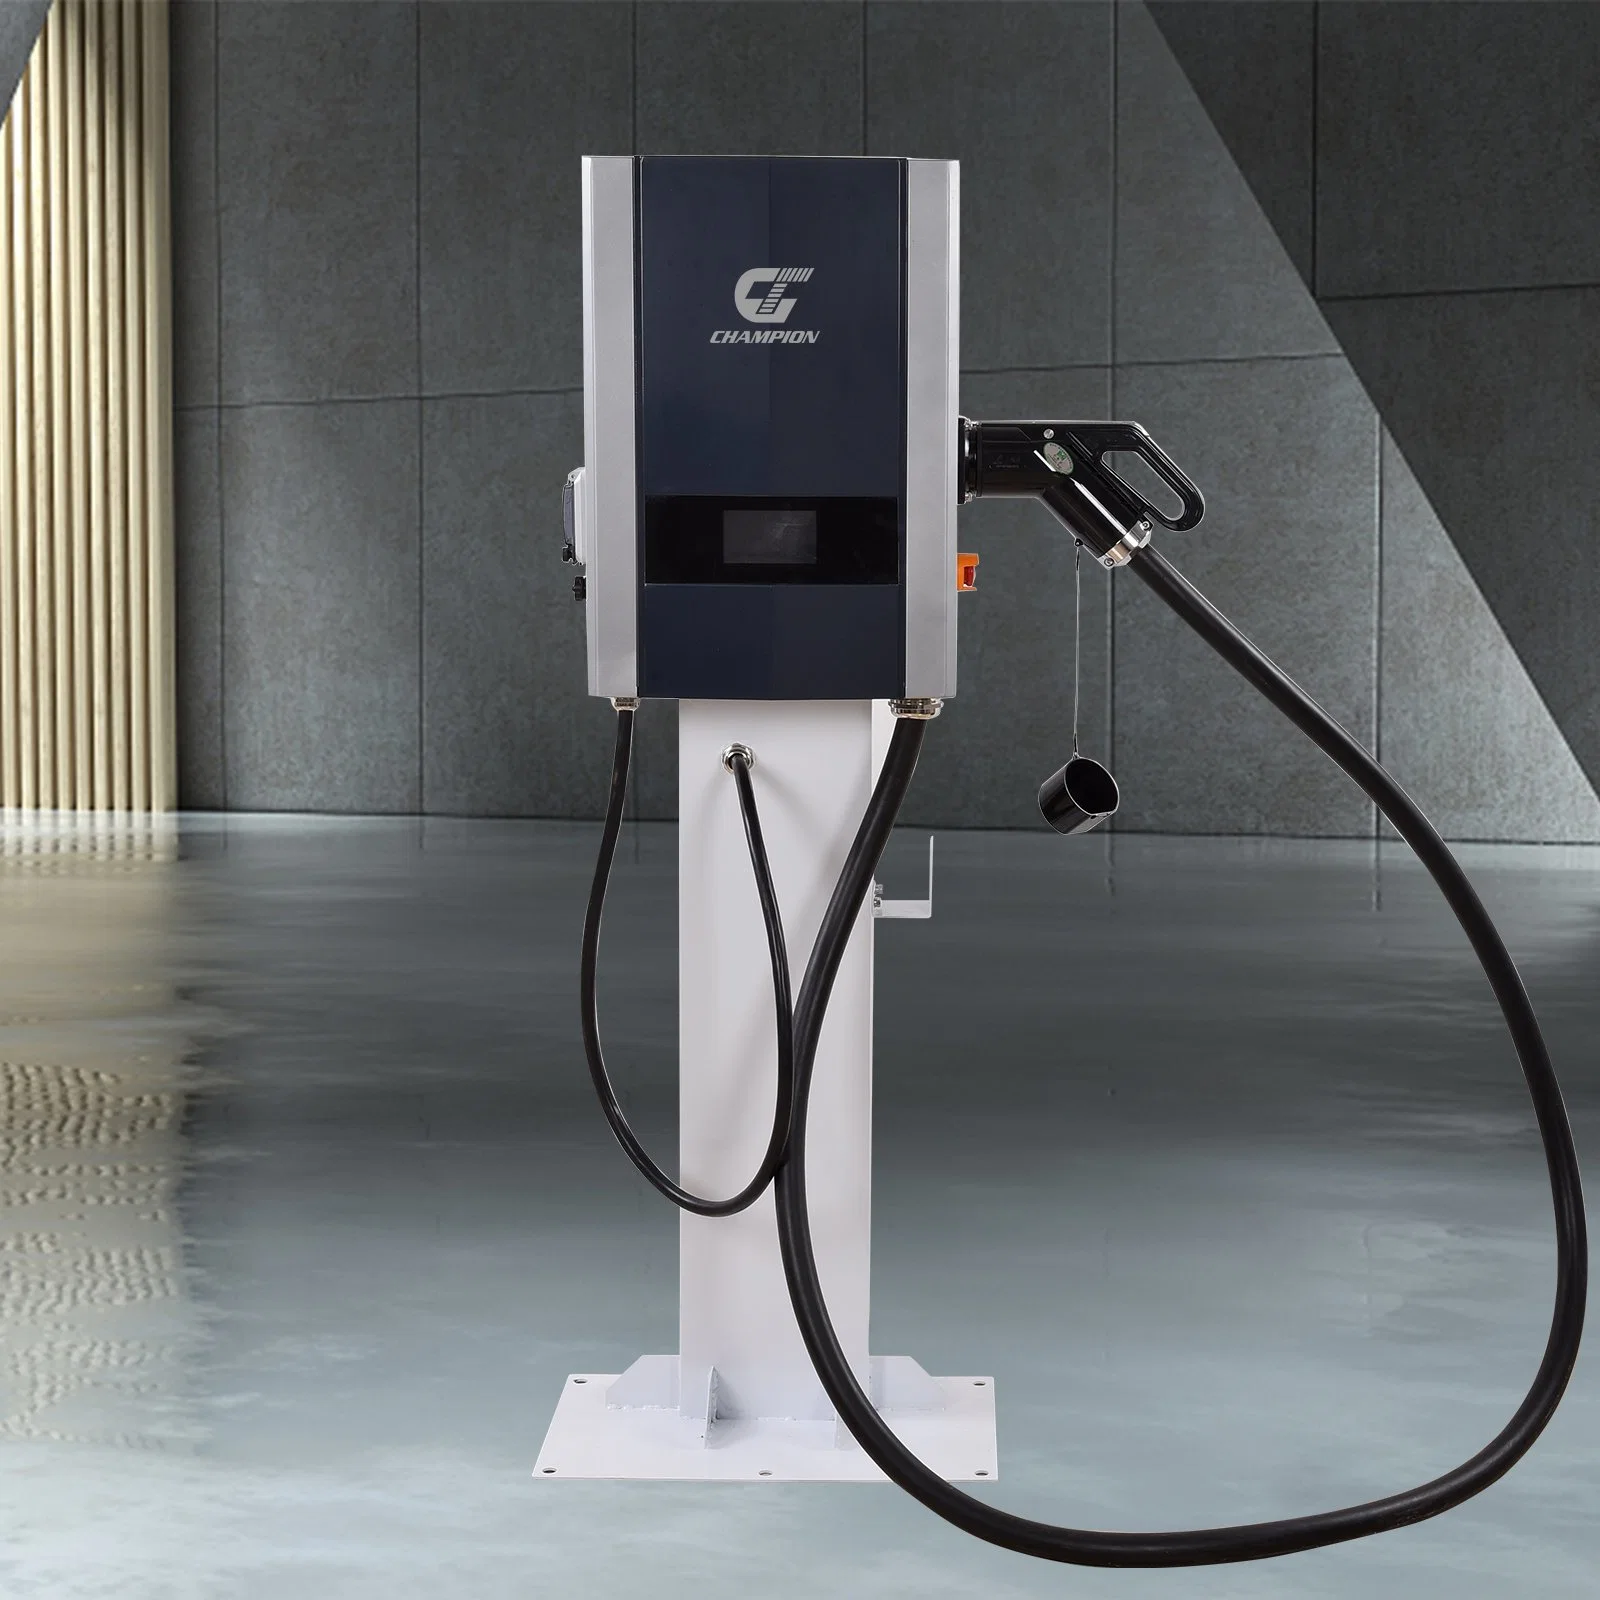 7kw/15kw/20kw/30kw Fast EV Charger Wall-Mounted EV Public Charger Station for Electric Car Charging